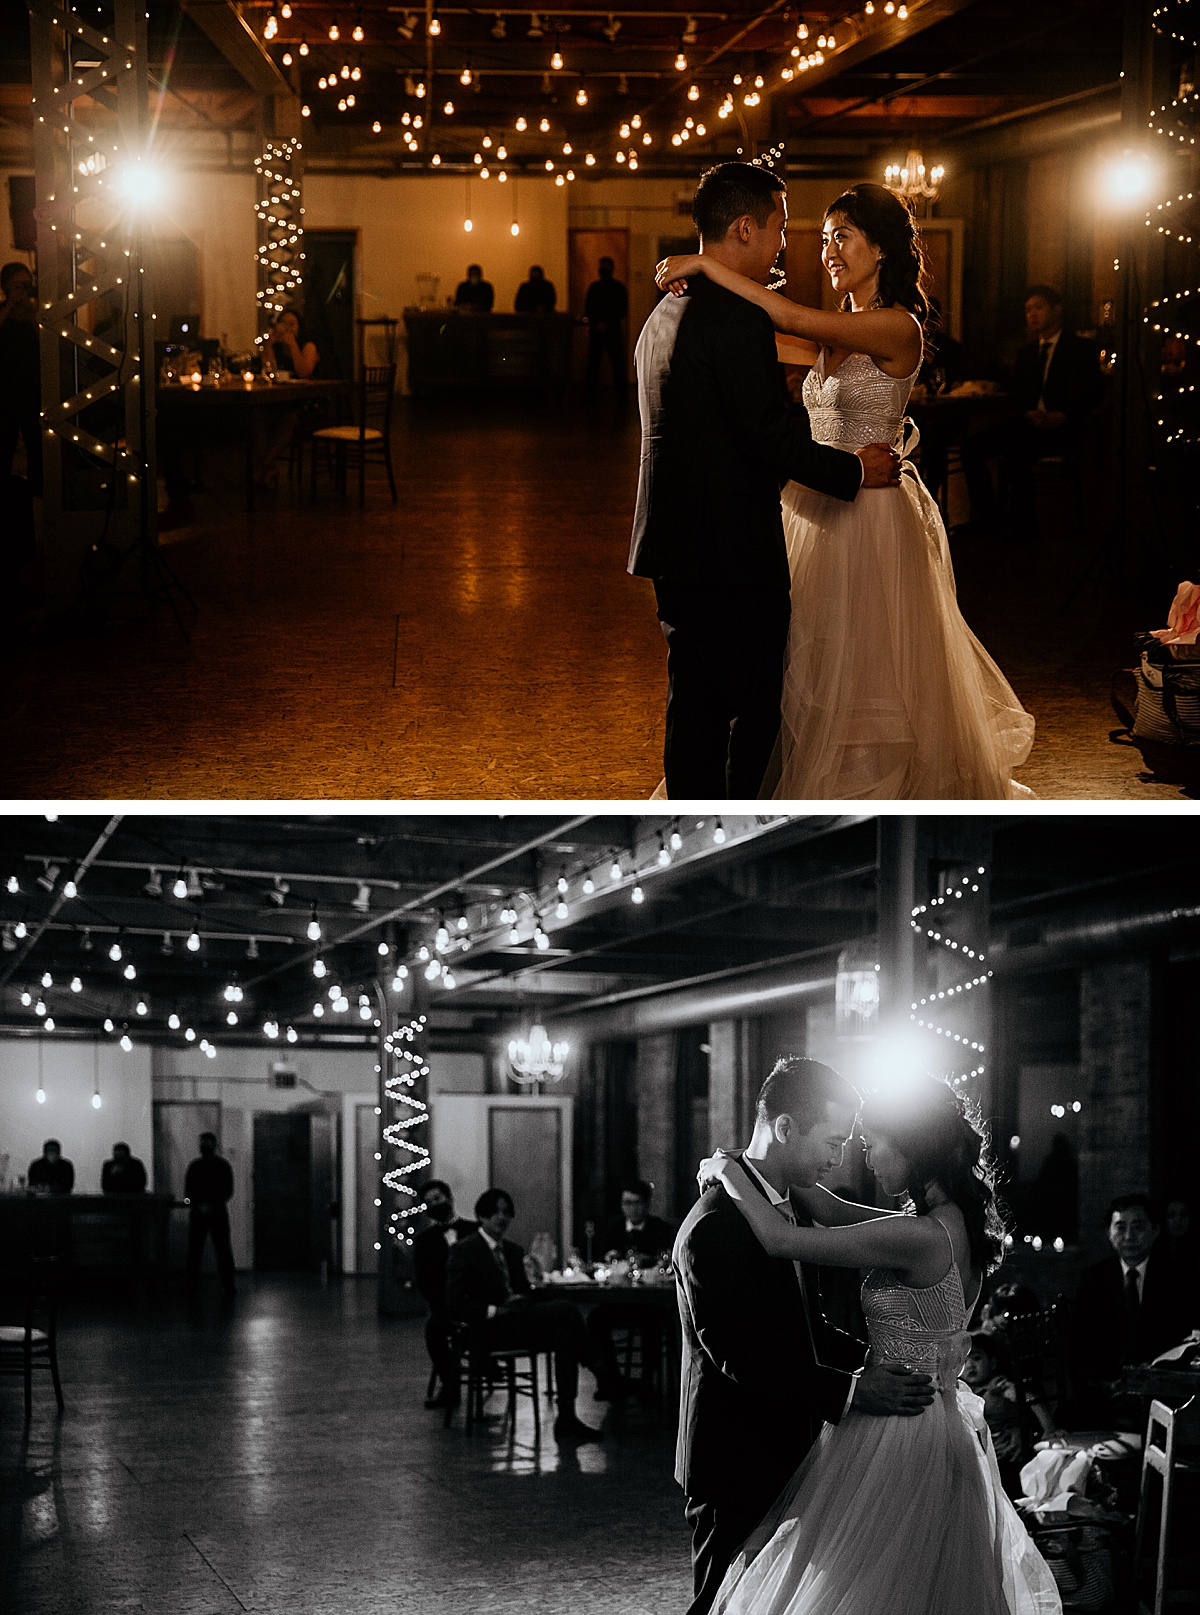 bride and groom sharing their first dance at wedding reception 